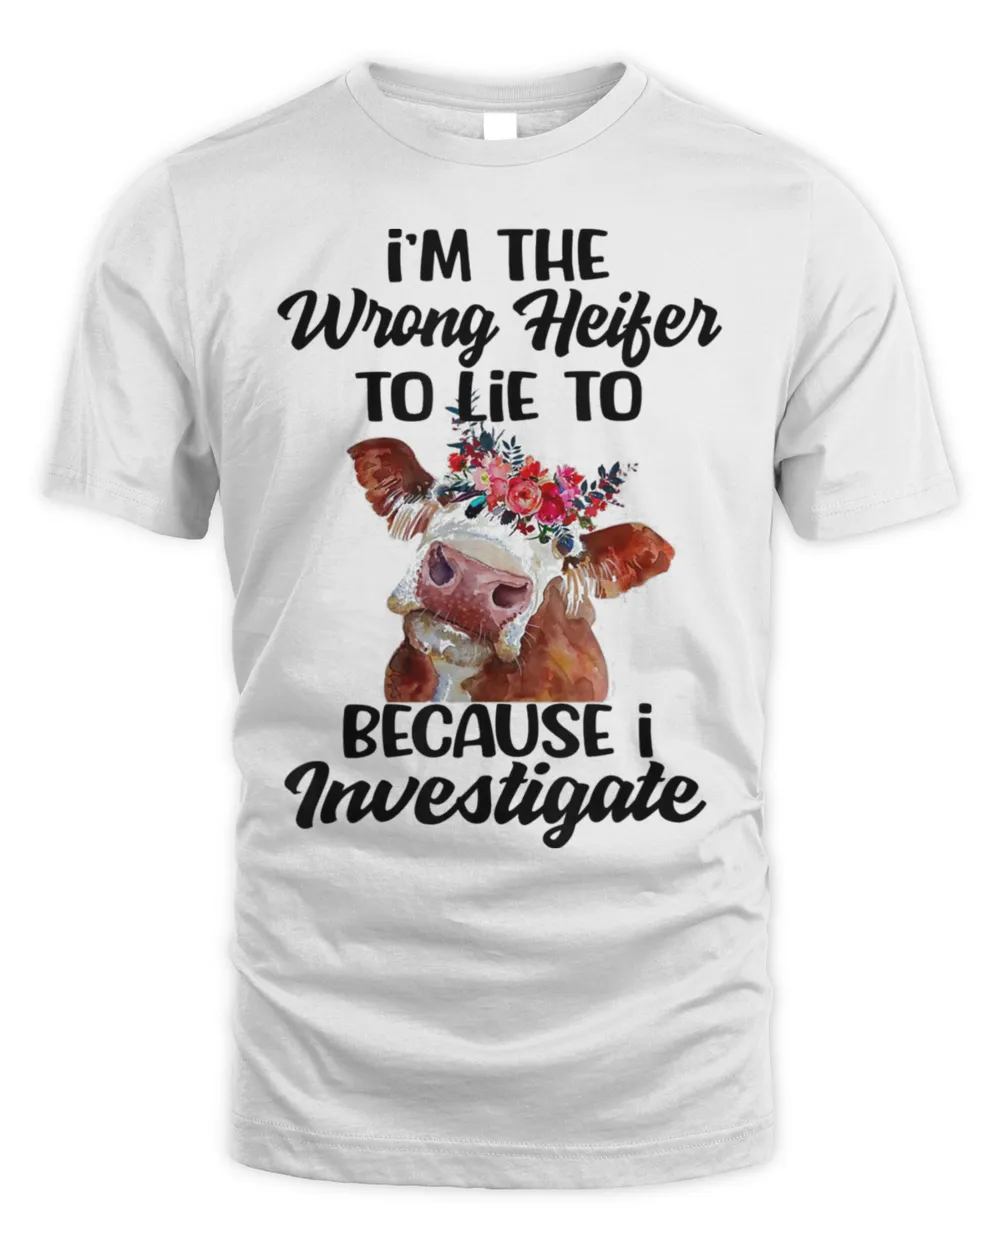 I’m The Wrong Heifer To Lie To Because I Investigate Tee Shirt